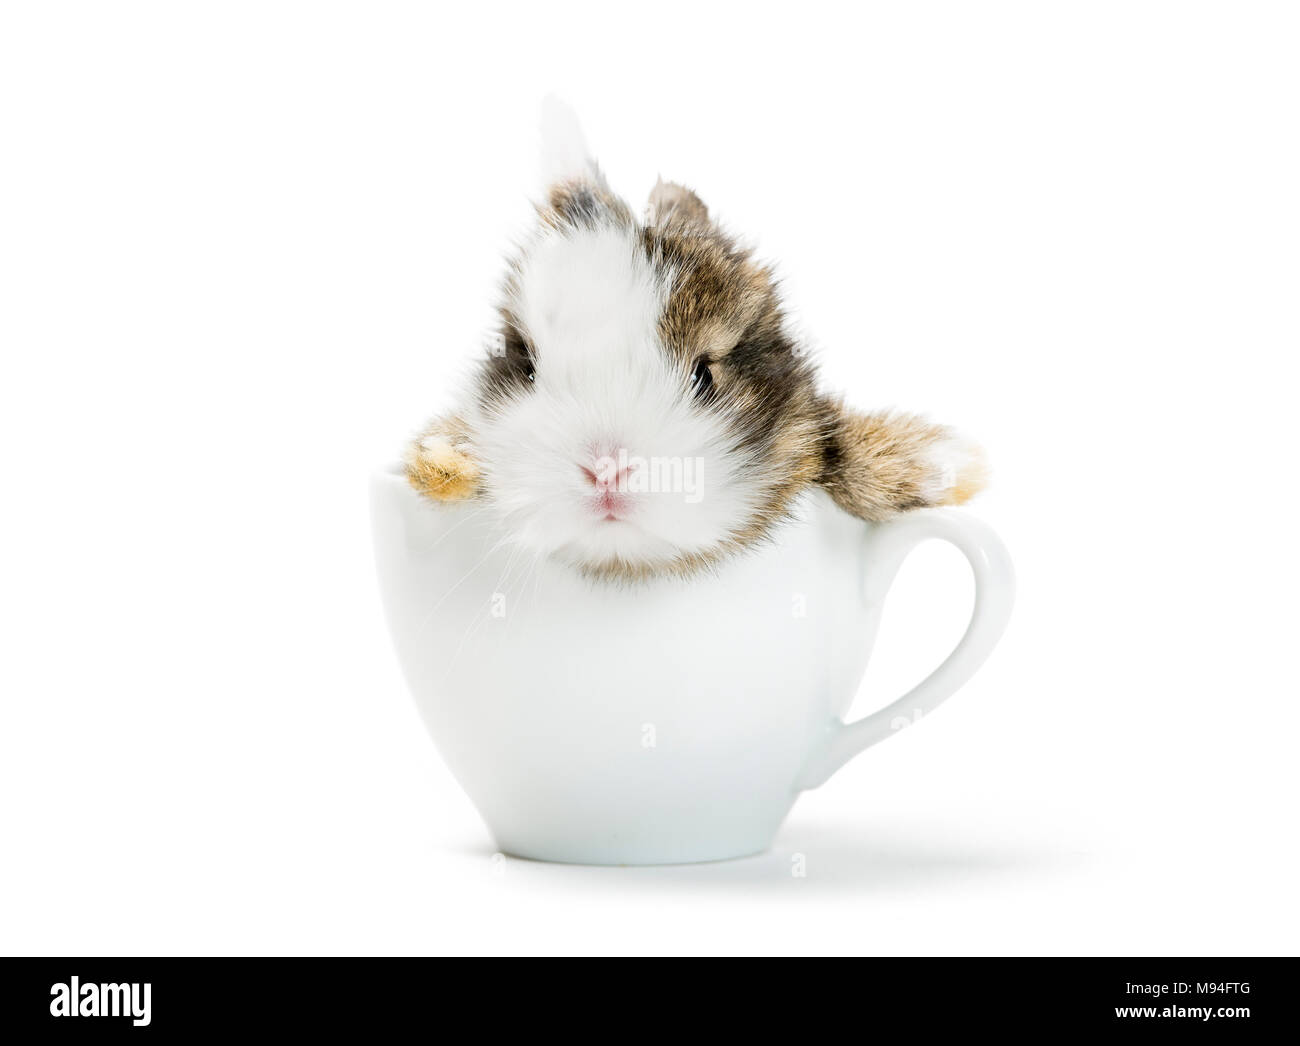 https://c8.alamy.com/comp/M94FTG/young-rabbit-sitting-in-a-coffee-cup-M94FTG.jpg